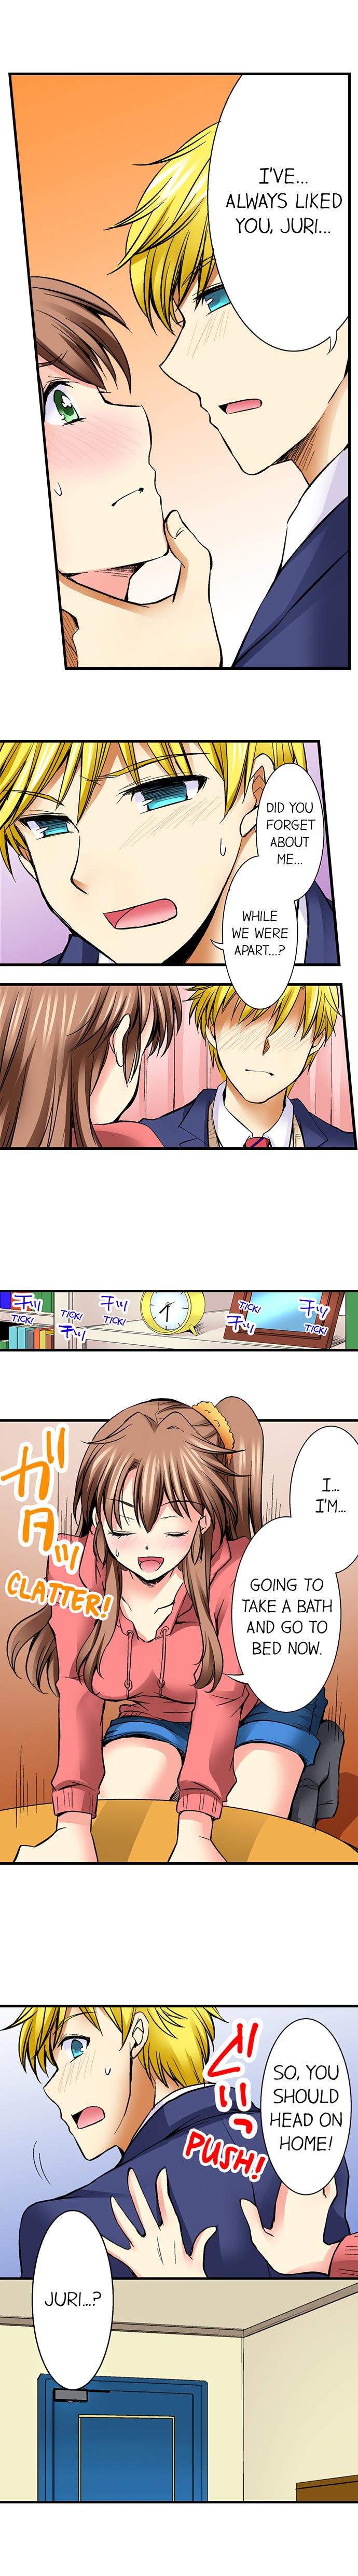 Why Can't i Have Sex With My Teacher? - Chapter 21 Page 5